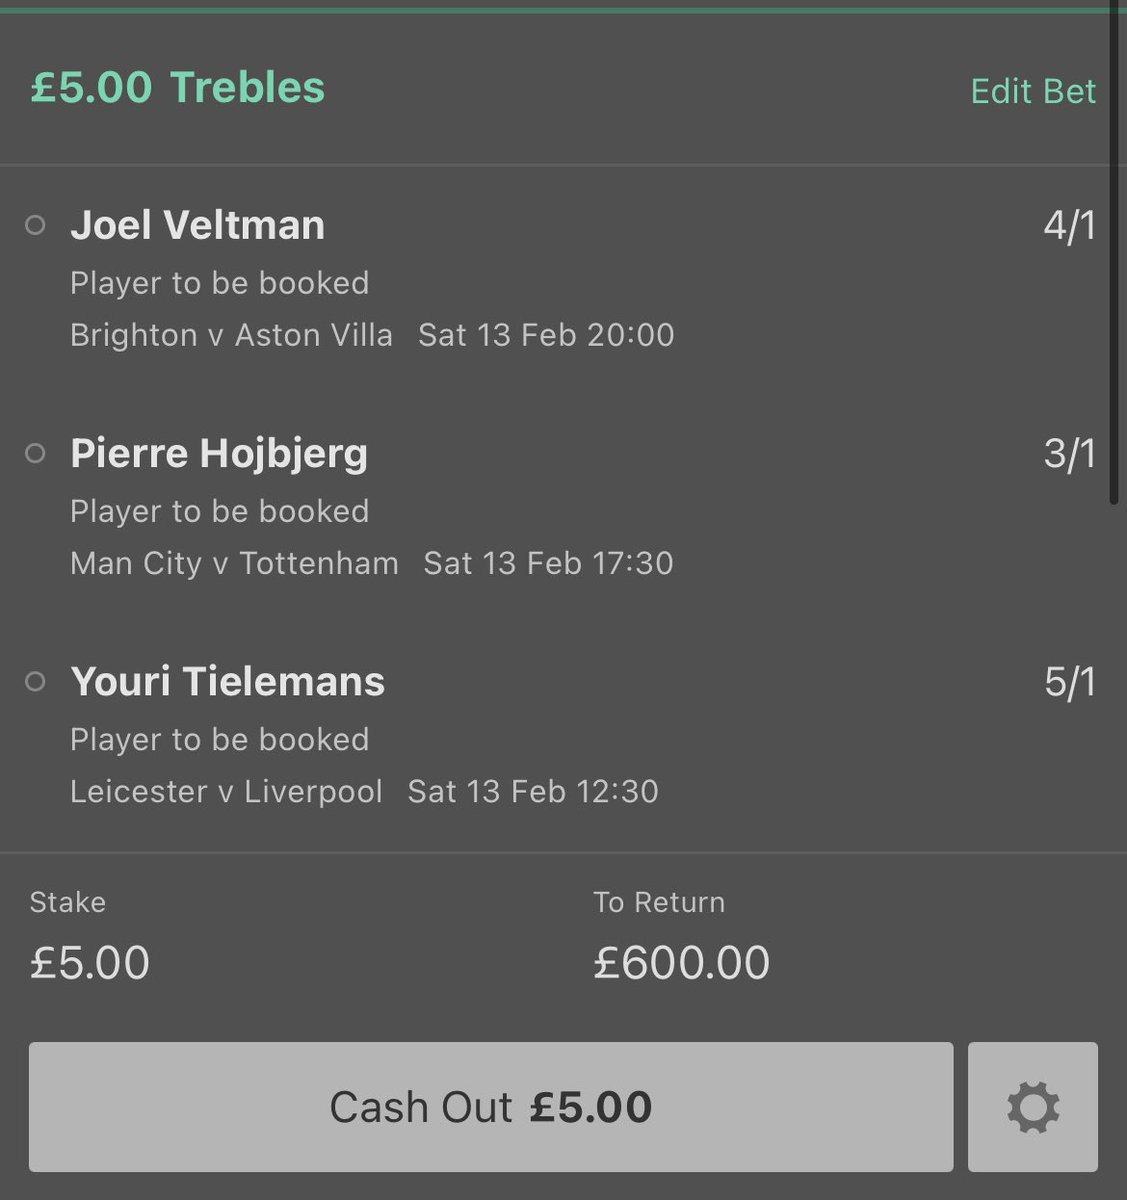 Retweet & follow to enter!! If this bet wins, I’ll give someone £300 cash!! Simply retweet this and by following me to enter!! (These aren’t necessarily ‘tips’, just a potential giveaway although they are on my shortlist, depending on line ups)